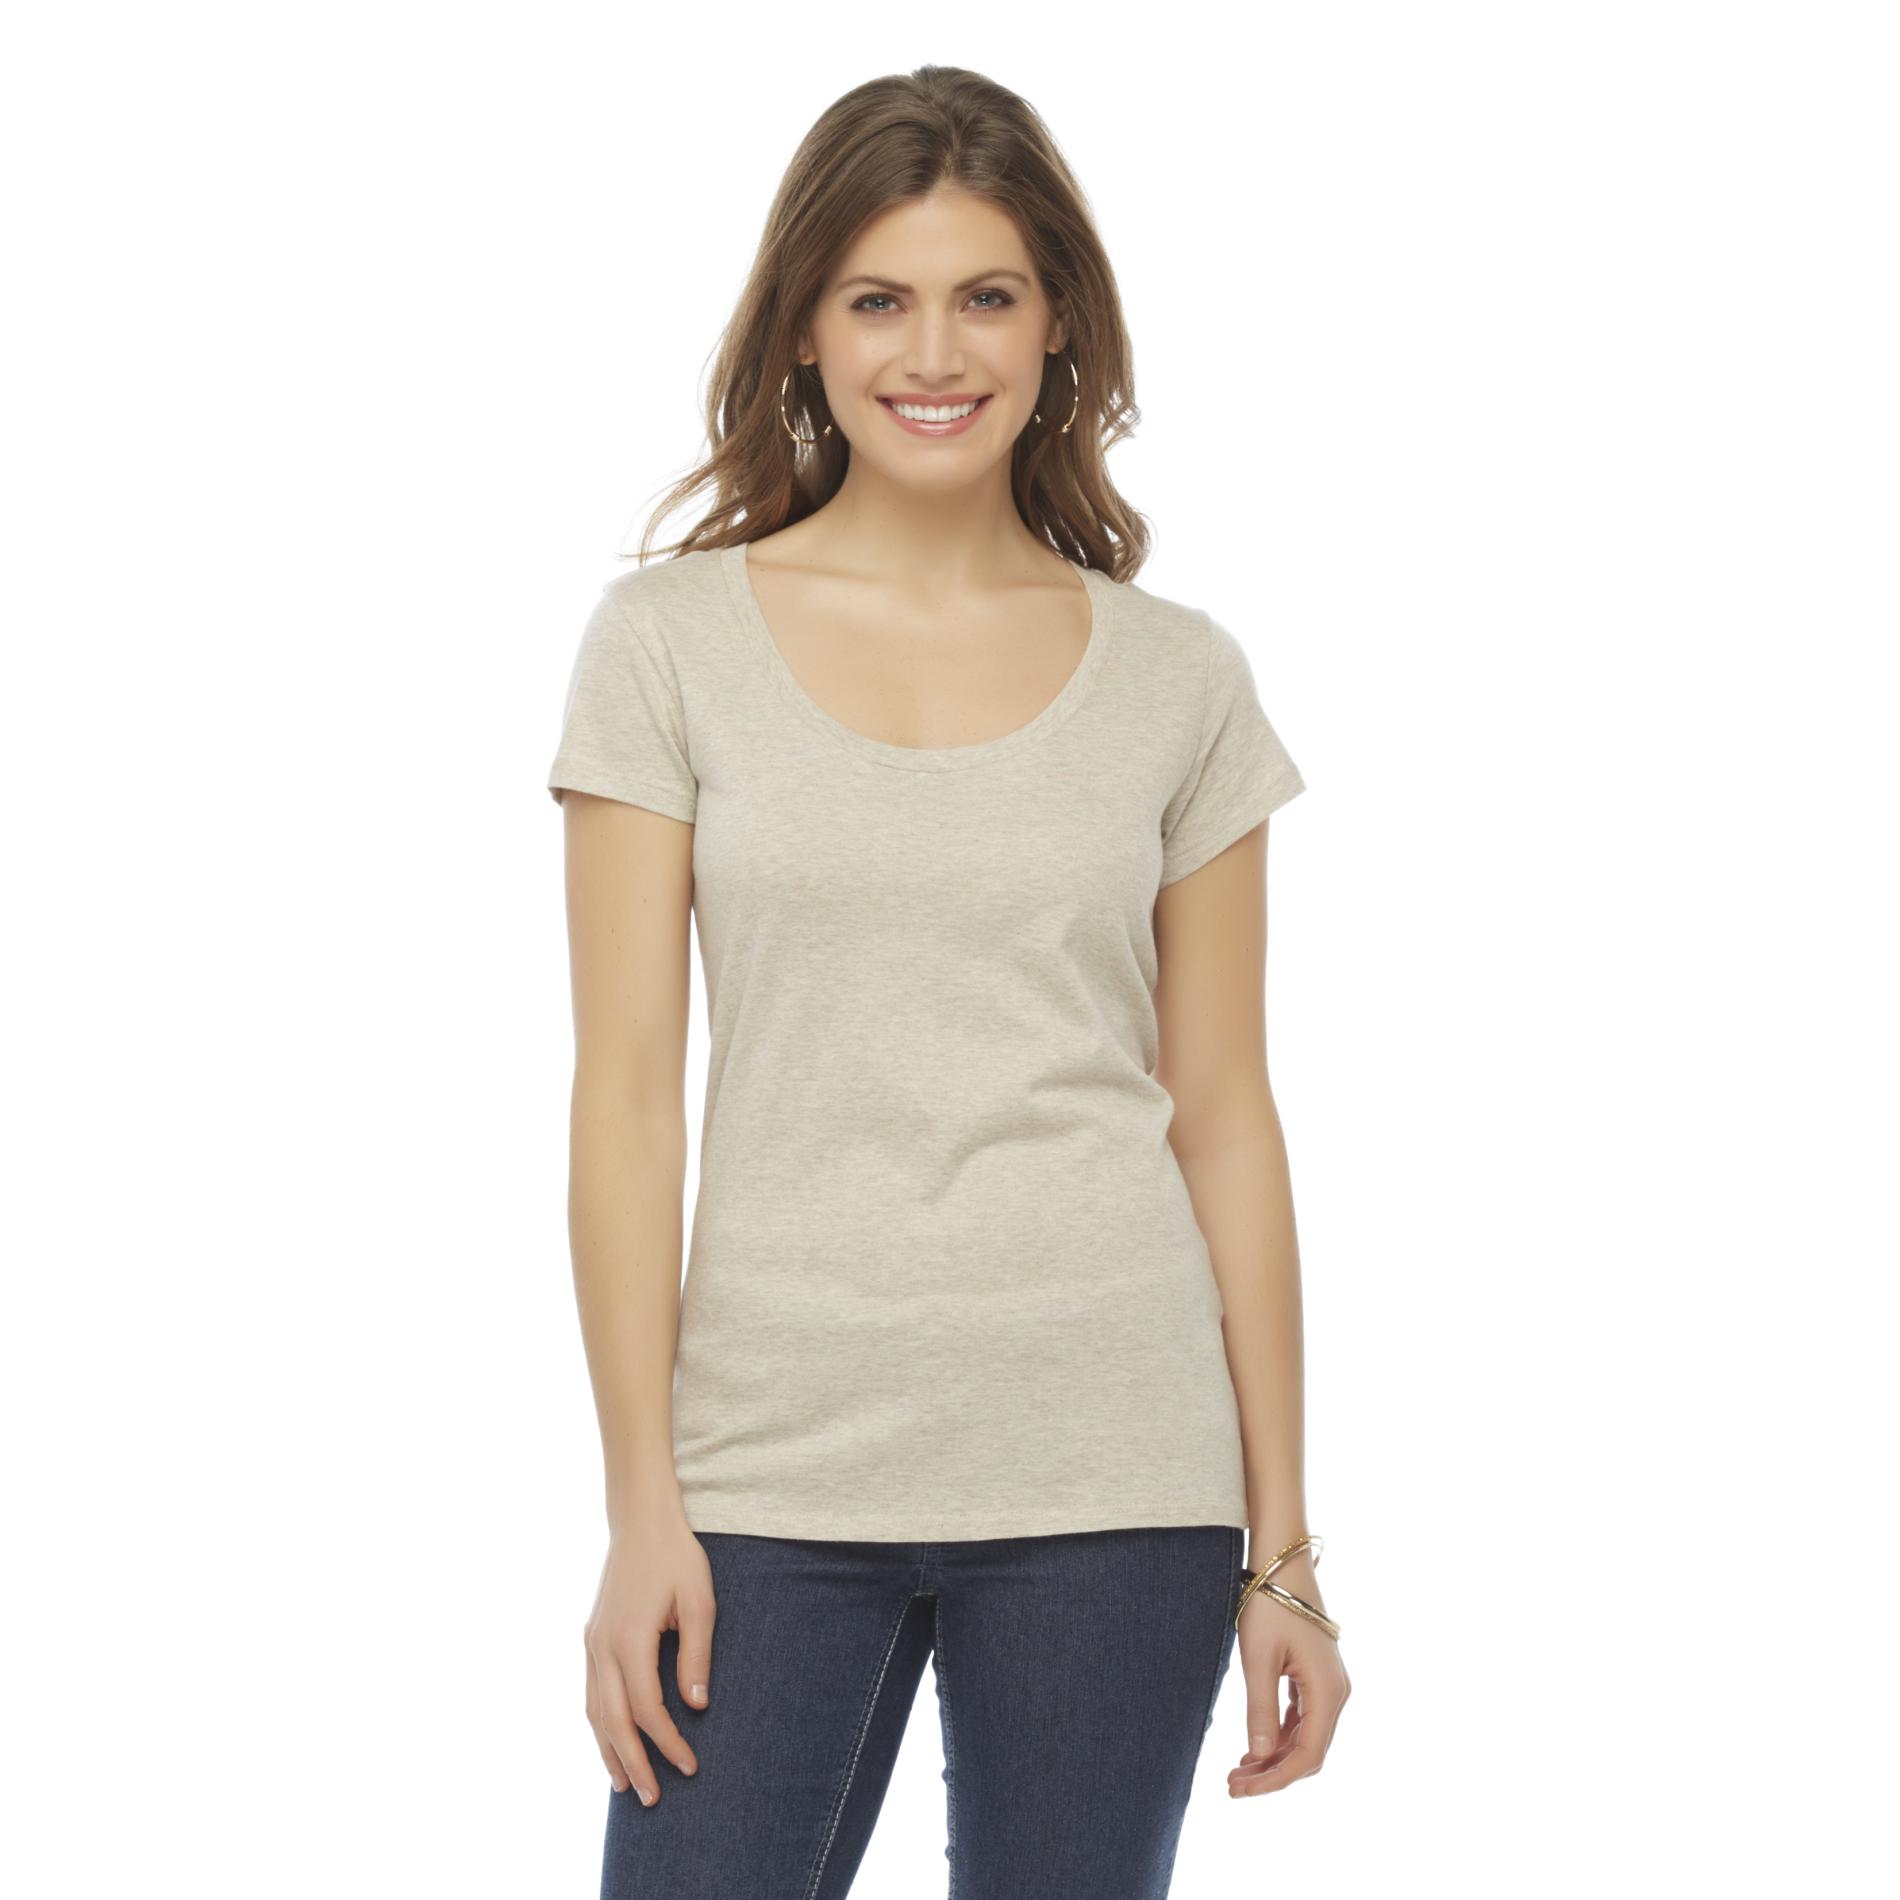 Canyon River Blues Women's Scoop Neck T-Shirt - Heathered